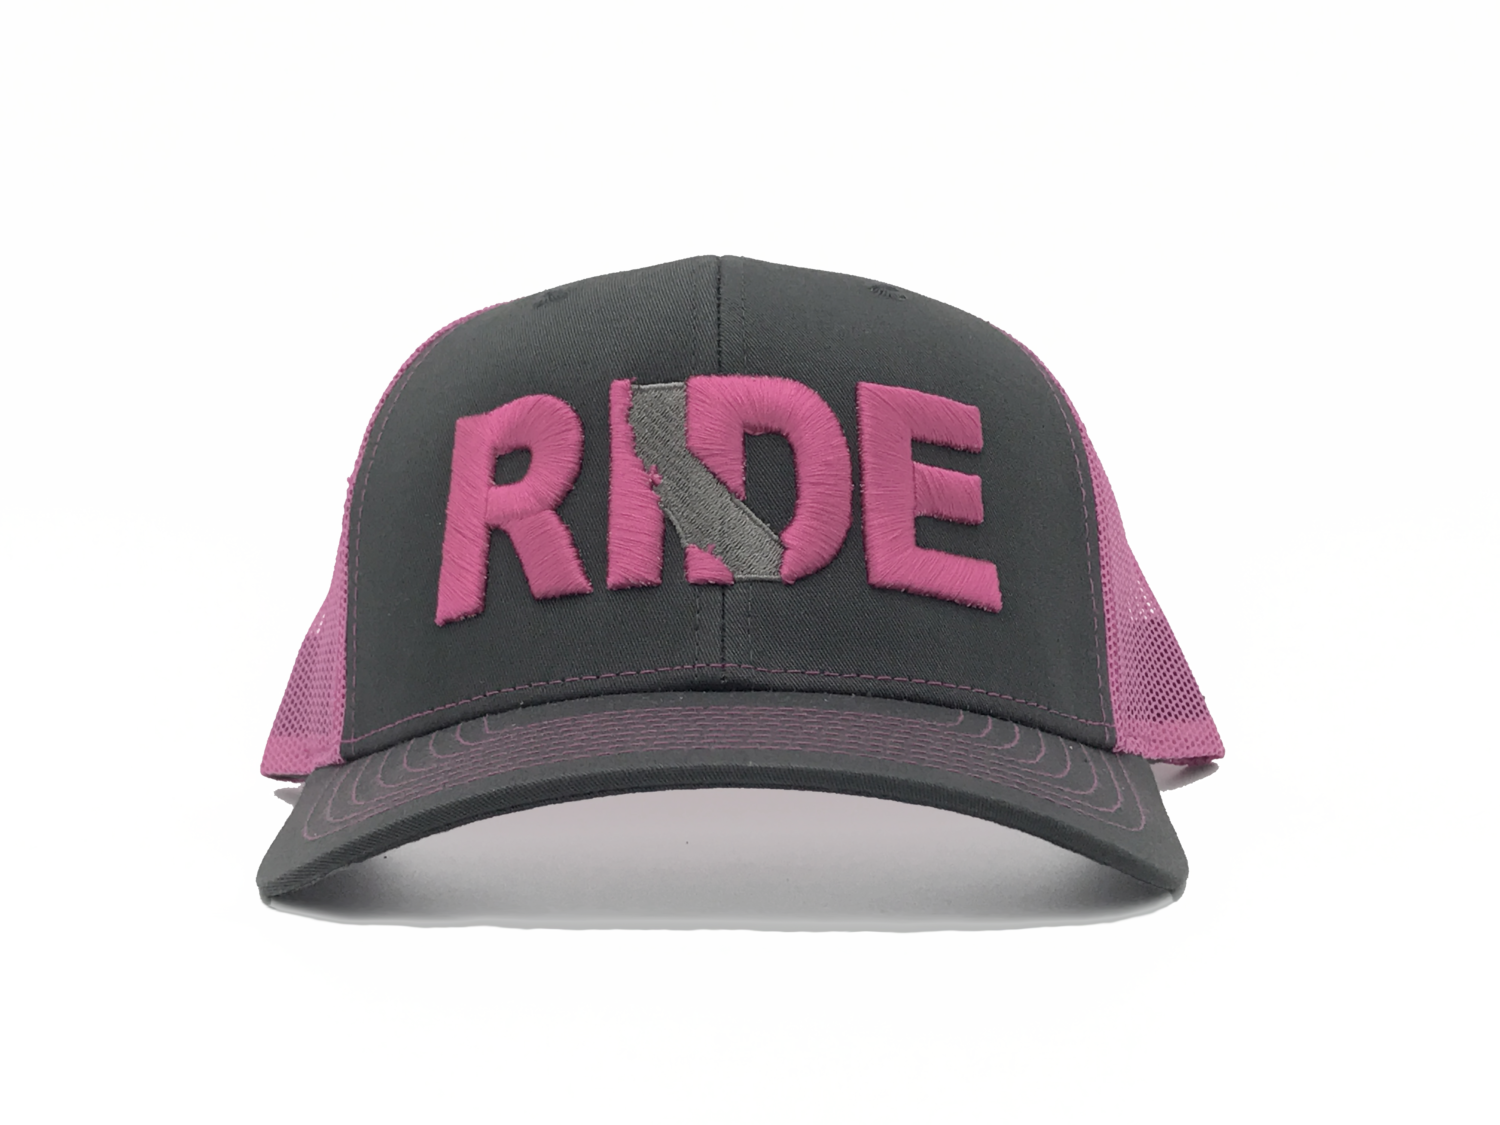 Ride California Classic Embroidered Snapback Trucker Hat Gray/Pink